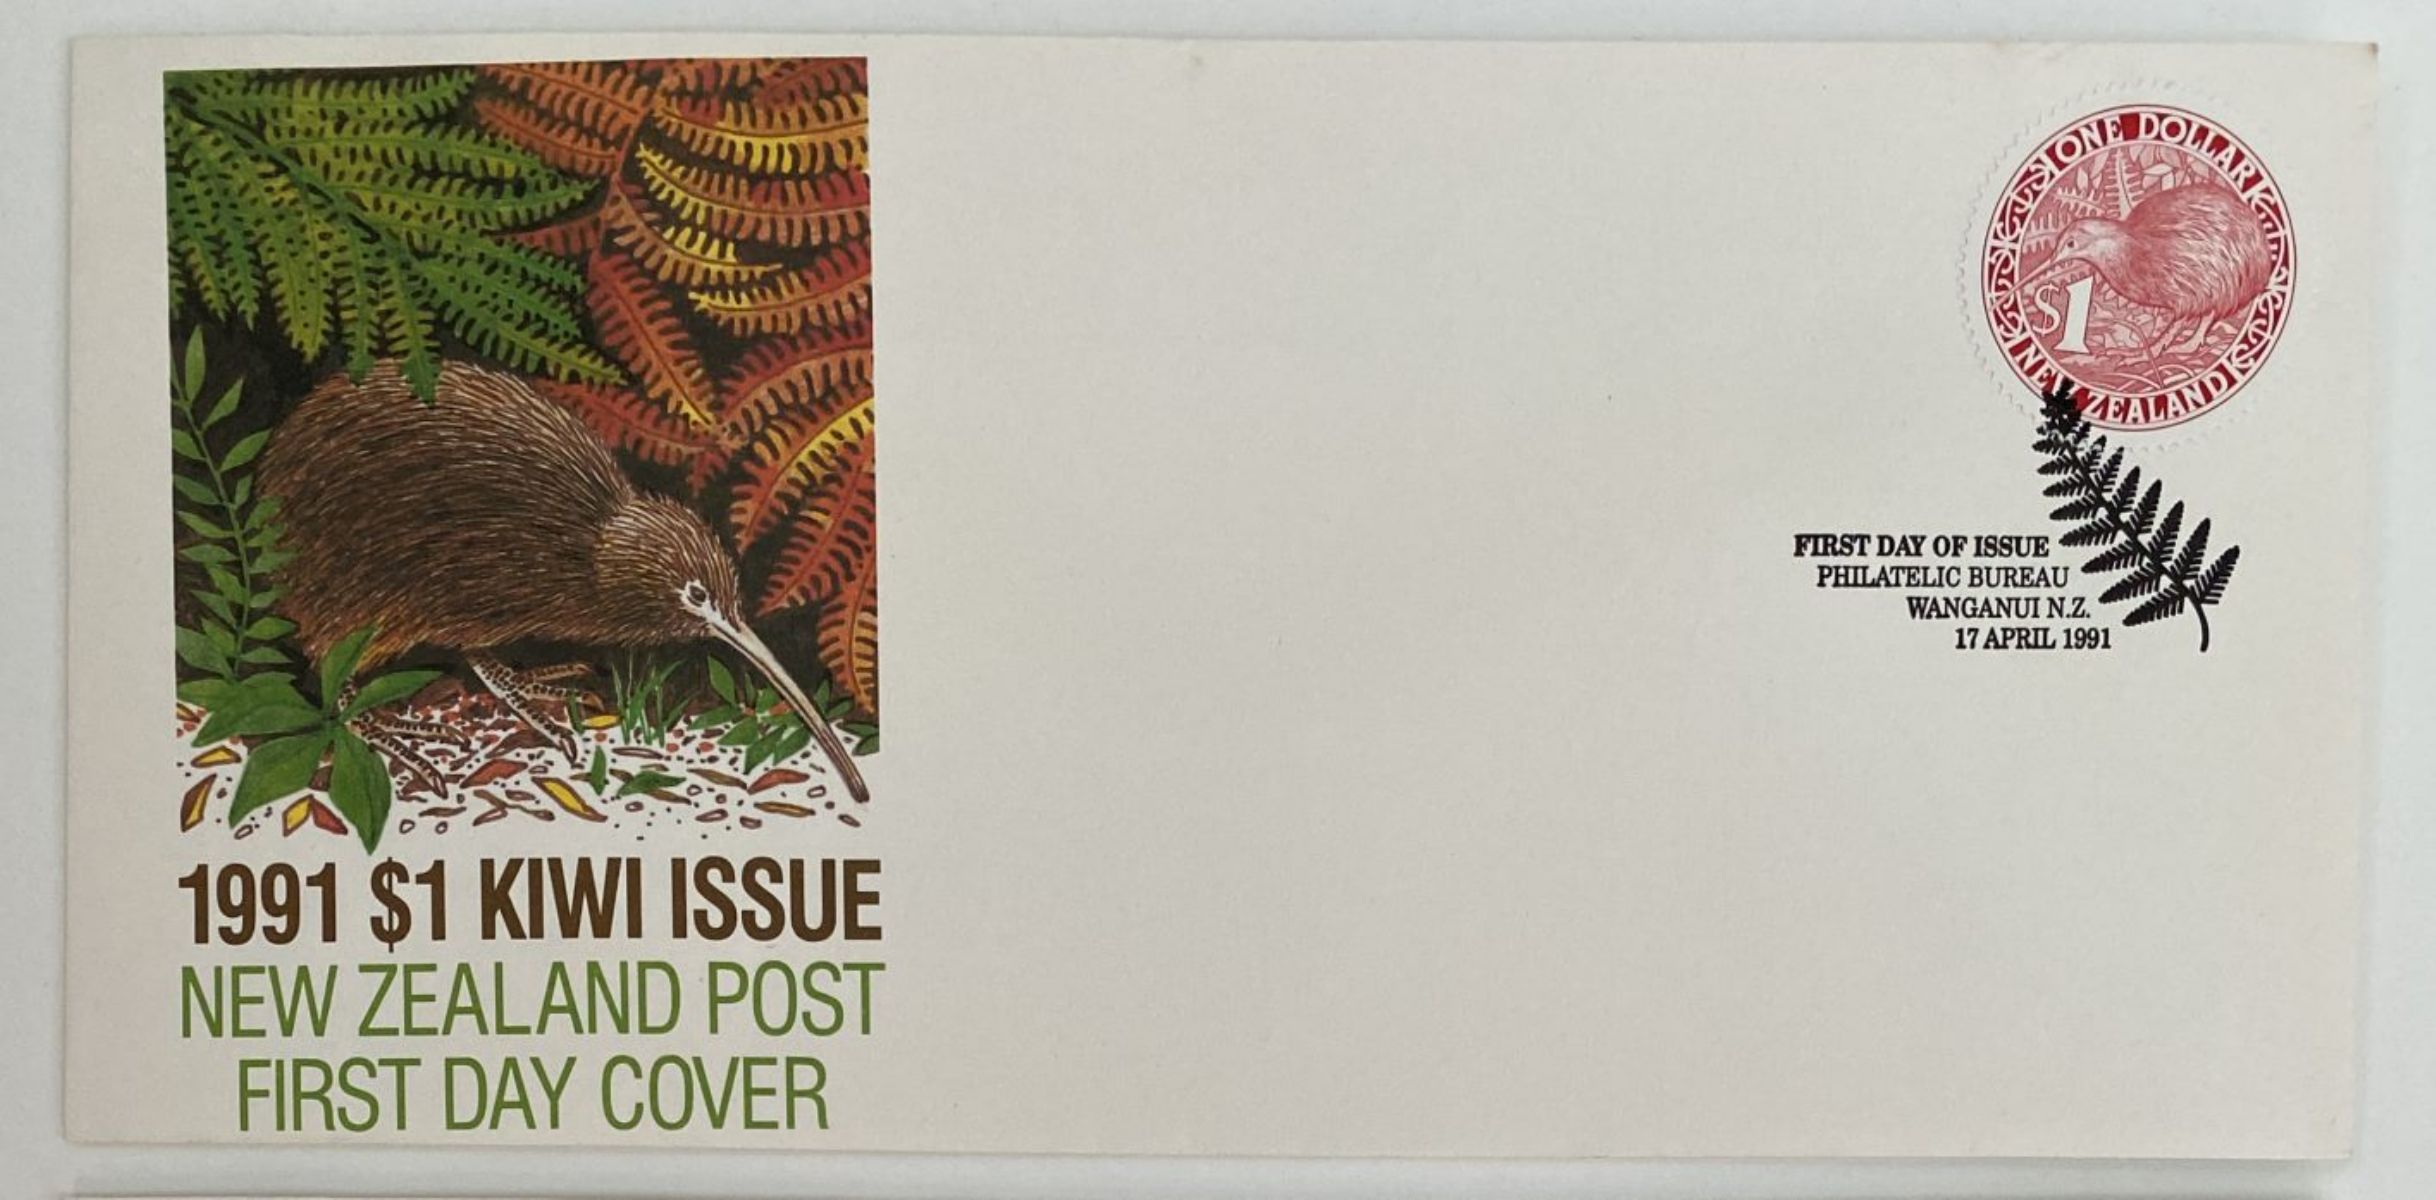 NEW ZEALAND STAMP / ENVELOPE: First Day Cover 1991